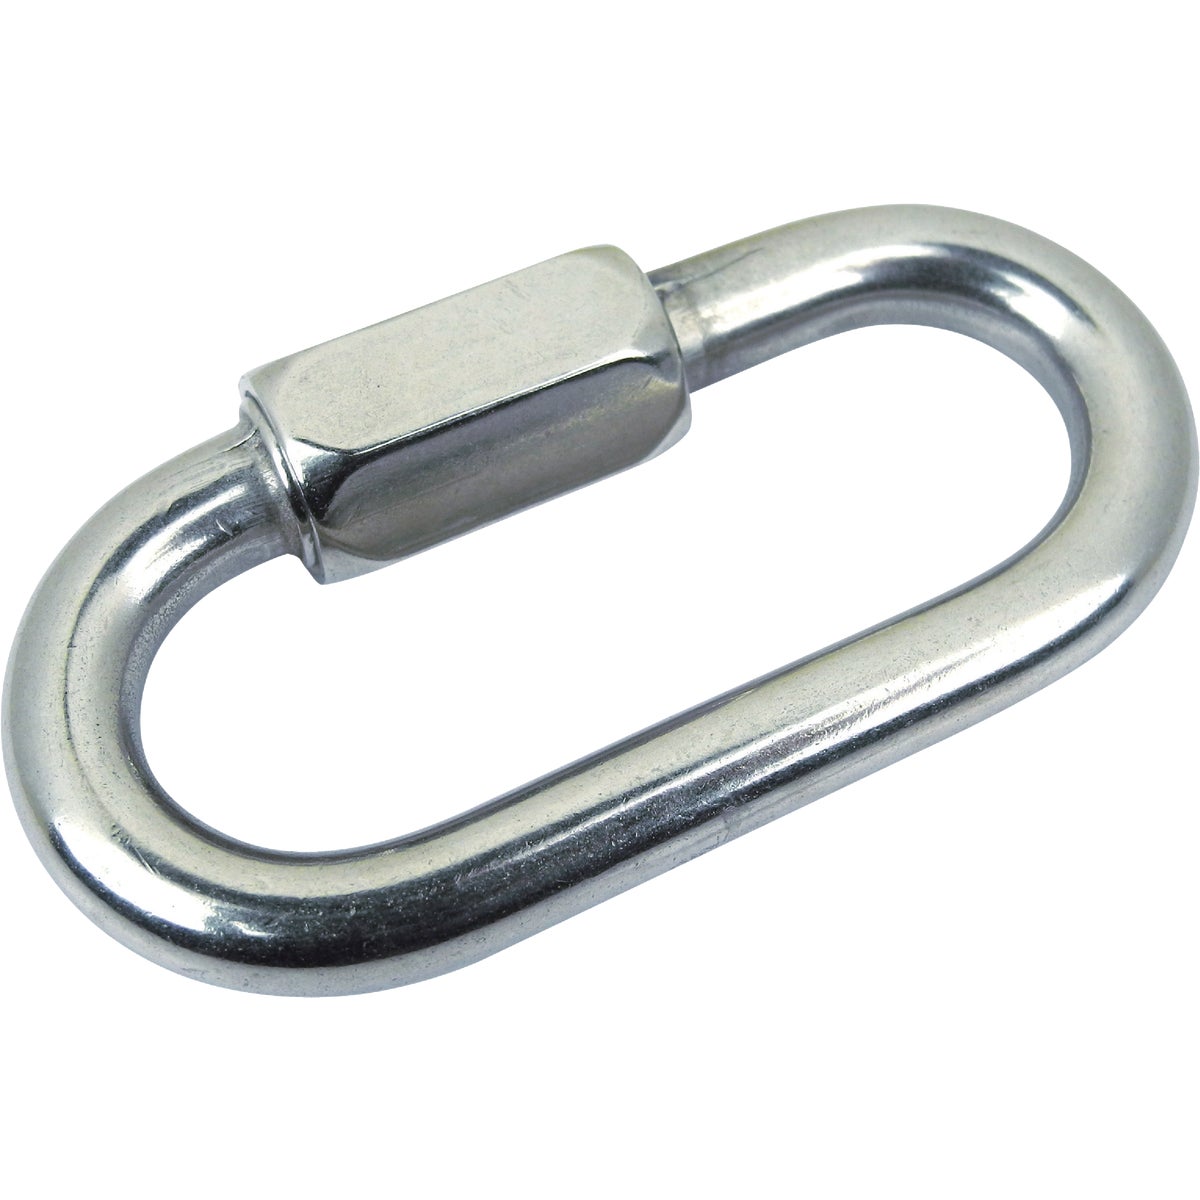 Seachoice 5/16 In. x 3 In. Stainless Steel Quick Link